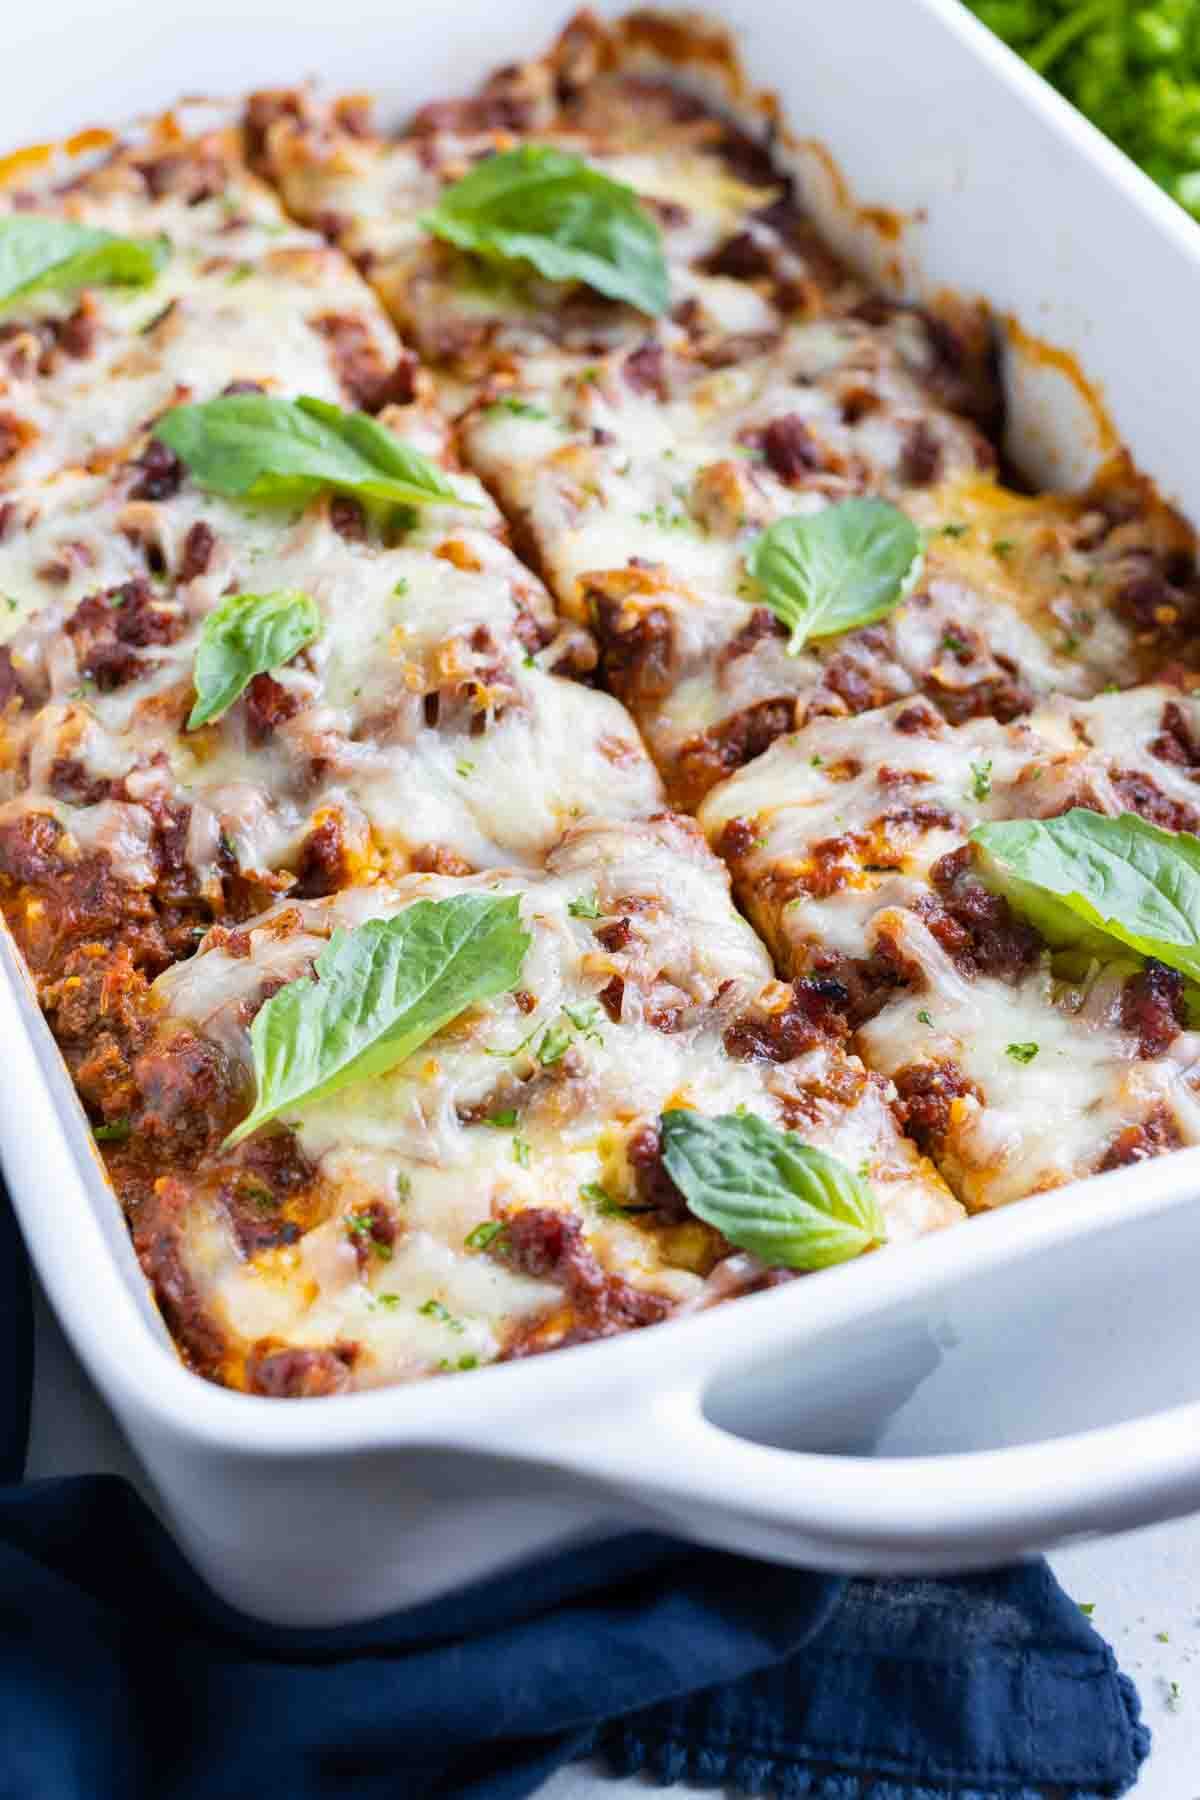 Zucchini lasagna has layers of meat sauce, zucchini, and cheese.